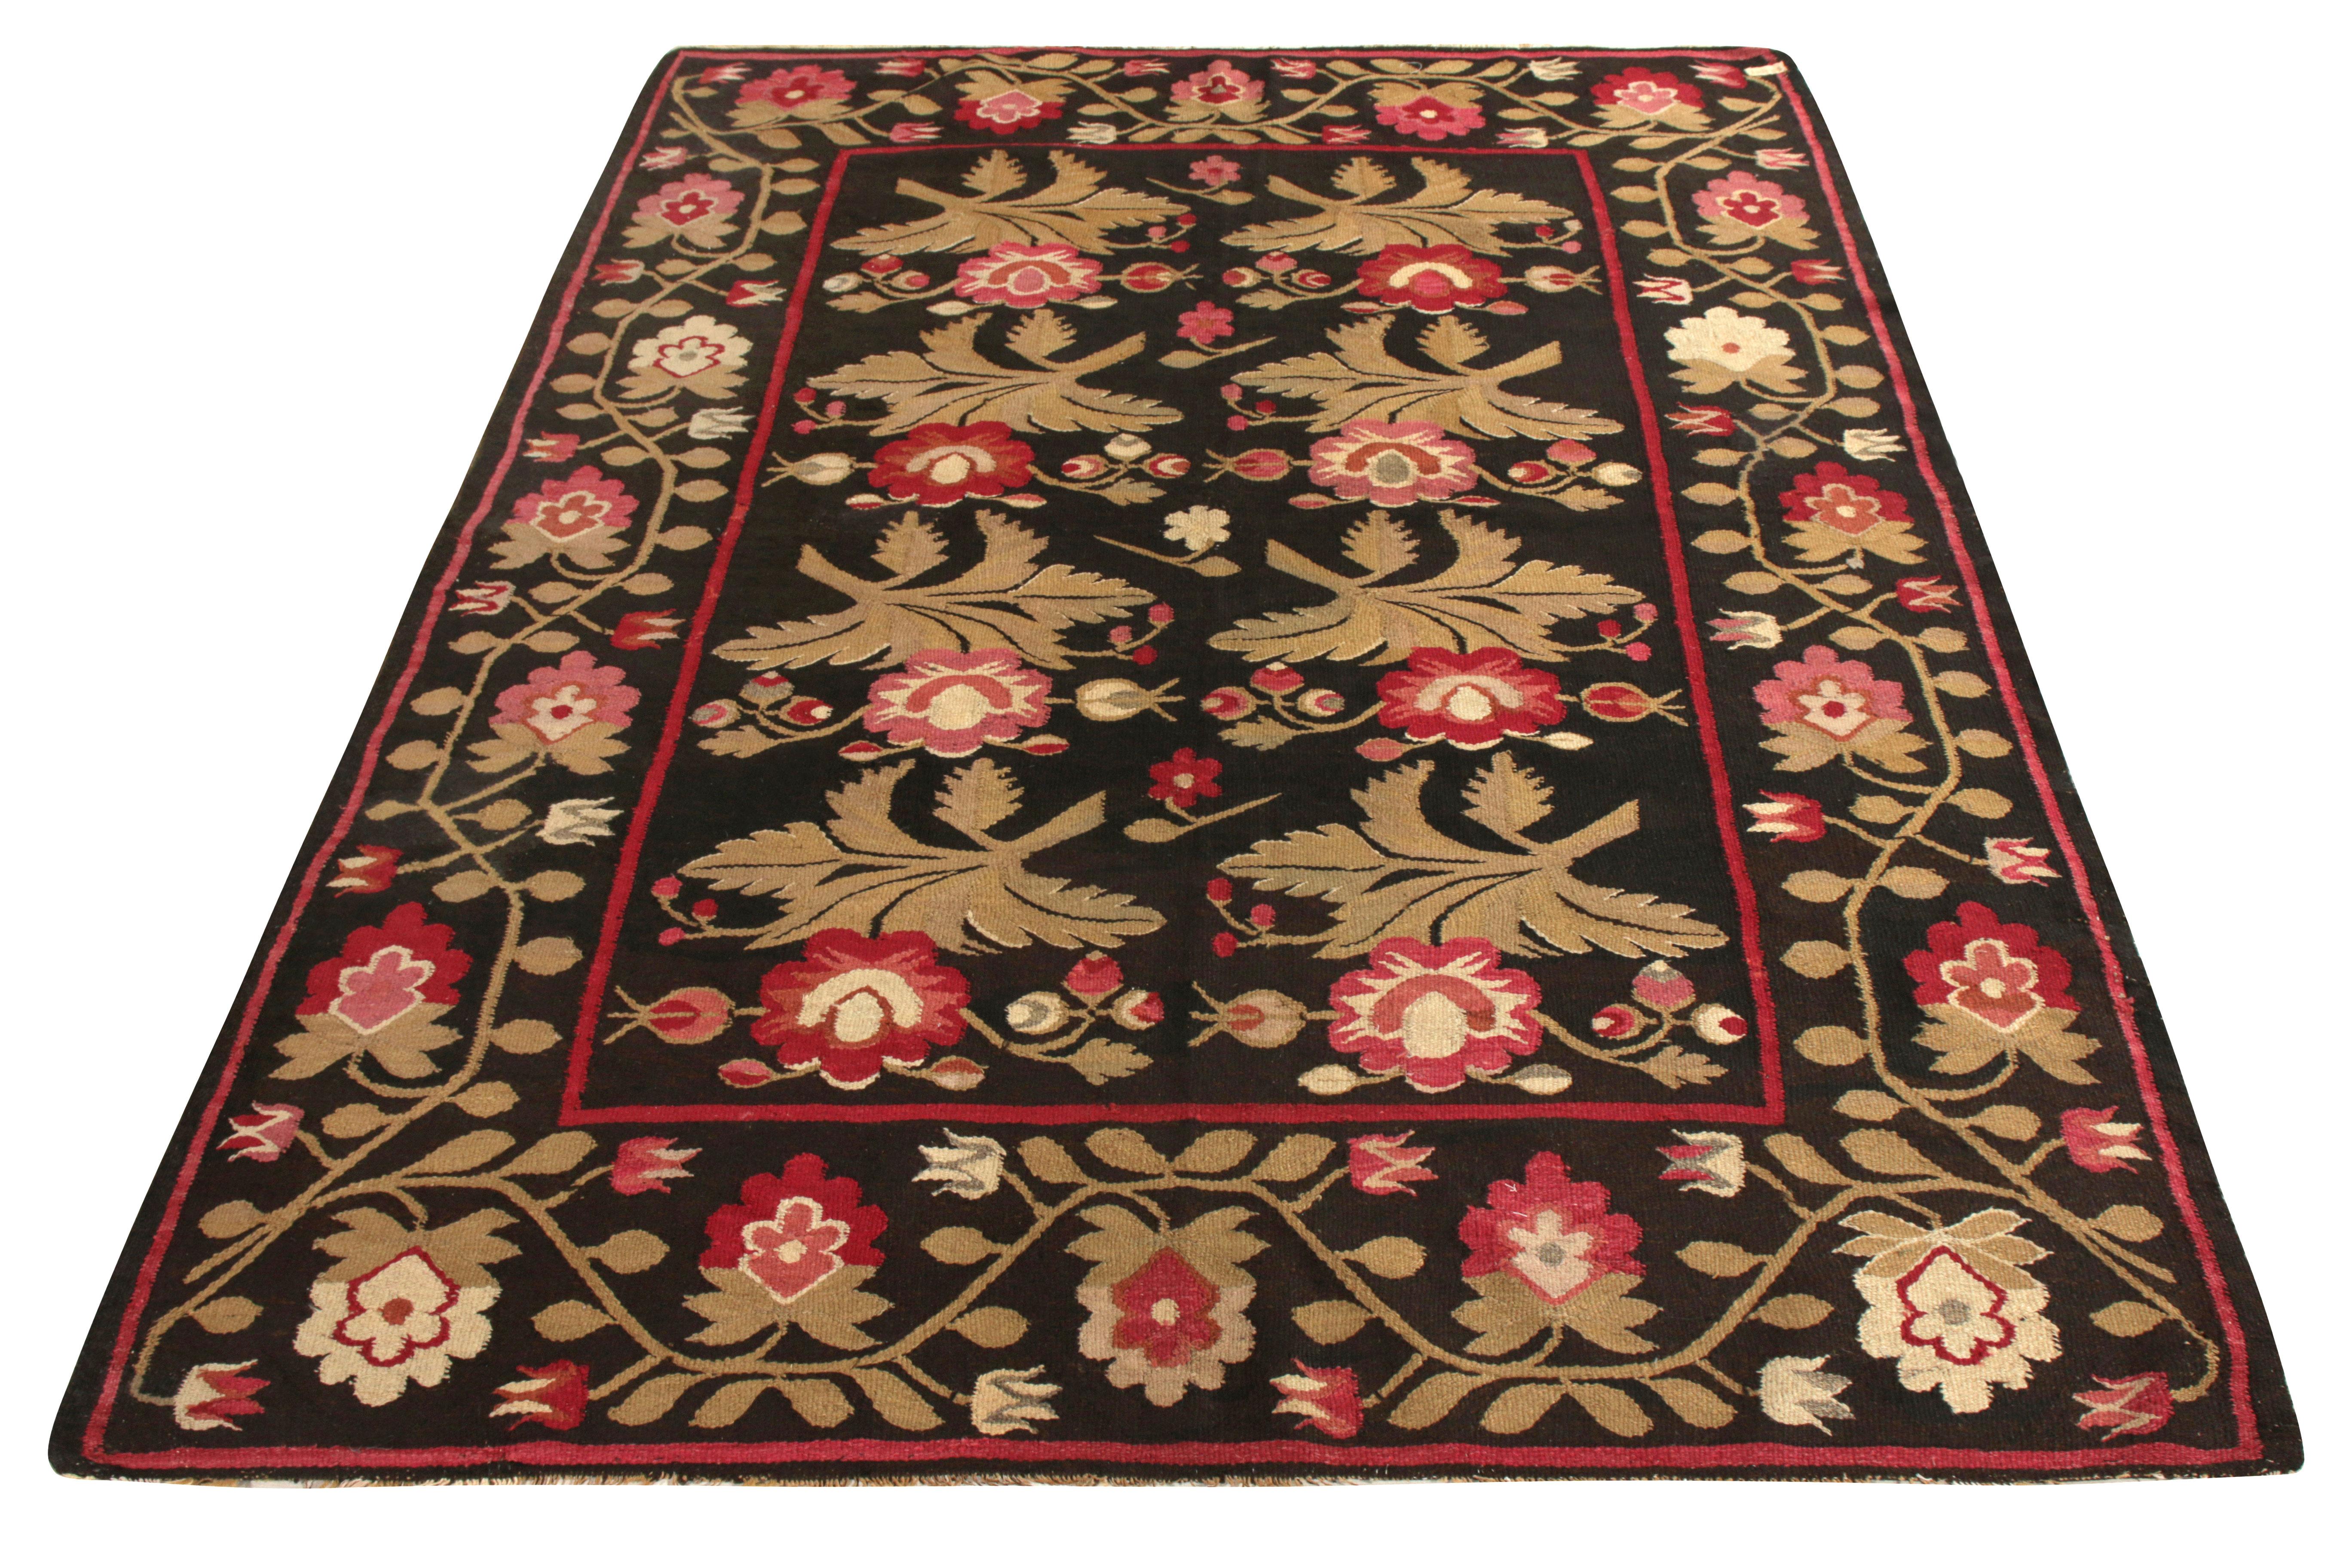 A 5x7 Bessarabian Kilim rug relishing classic floral intricacy in fine wool foundation entering Rug & Kilim’s exclusive line of classic Kilims. The floral design lends a welcoming vibe with vibrant red and pink hues, highlighted naturally against a